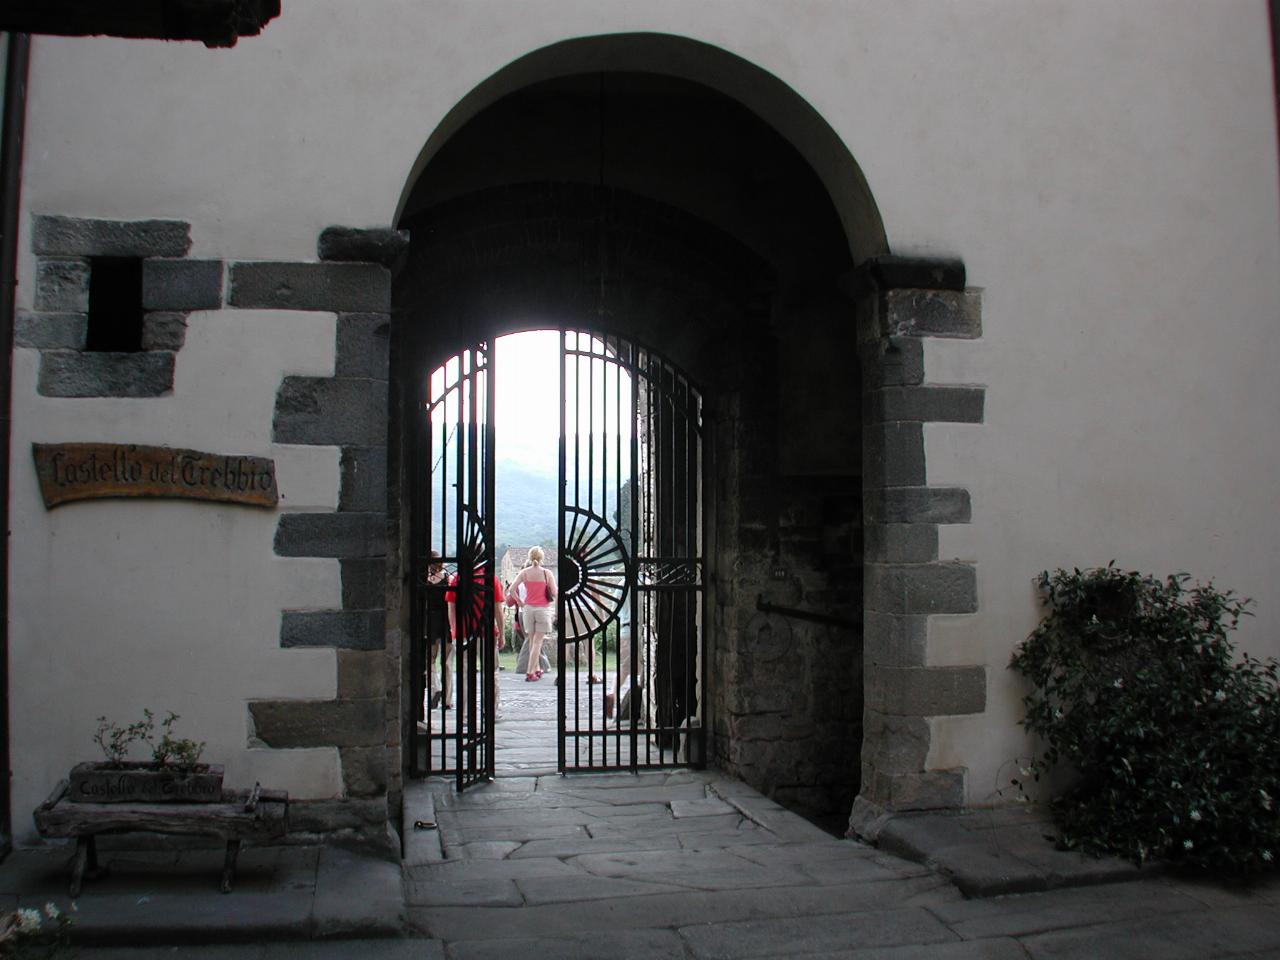 Castello del Trebbio courtyard, looking out to road and hills beyond